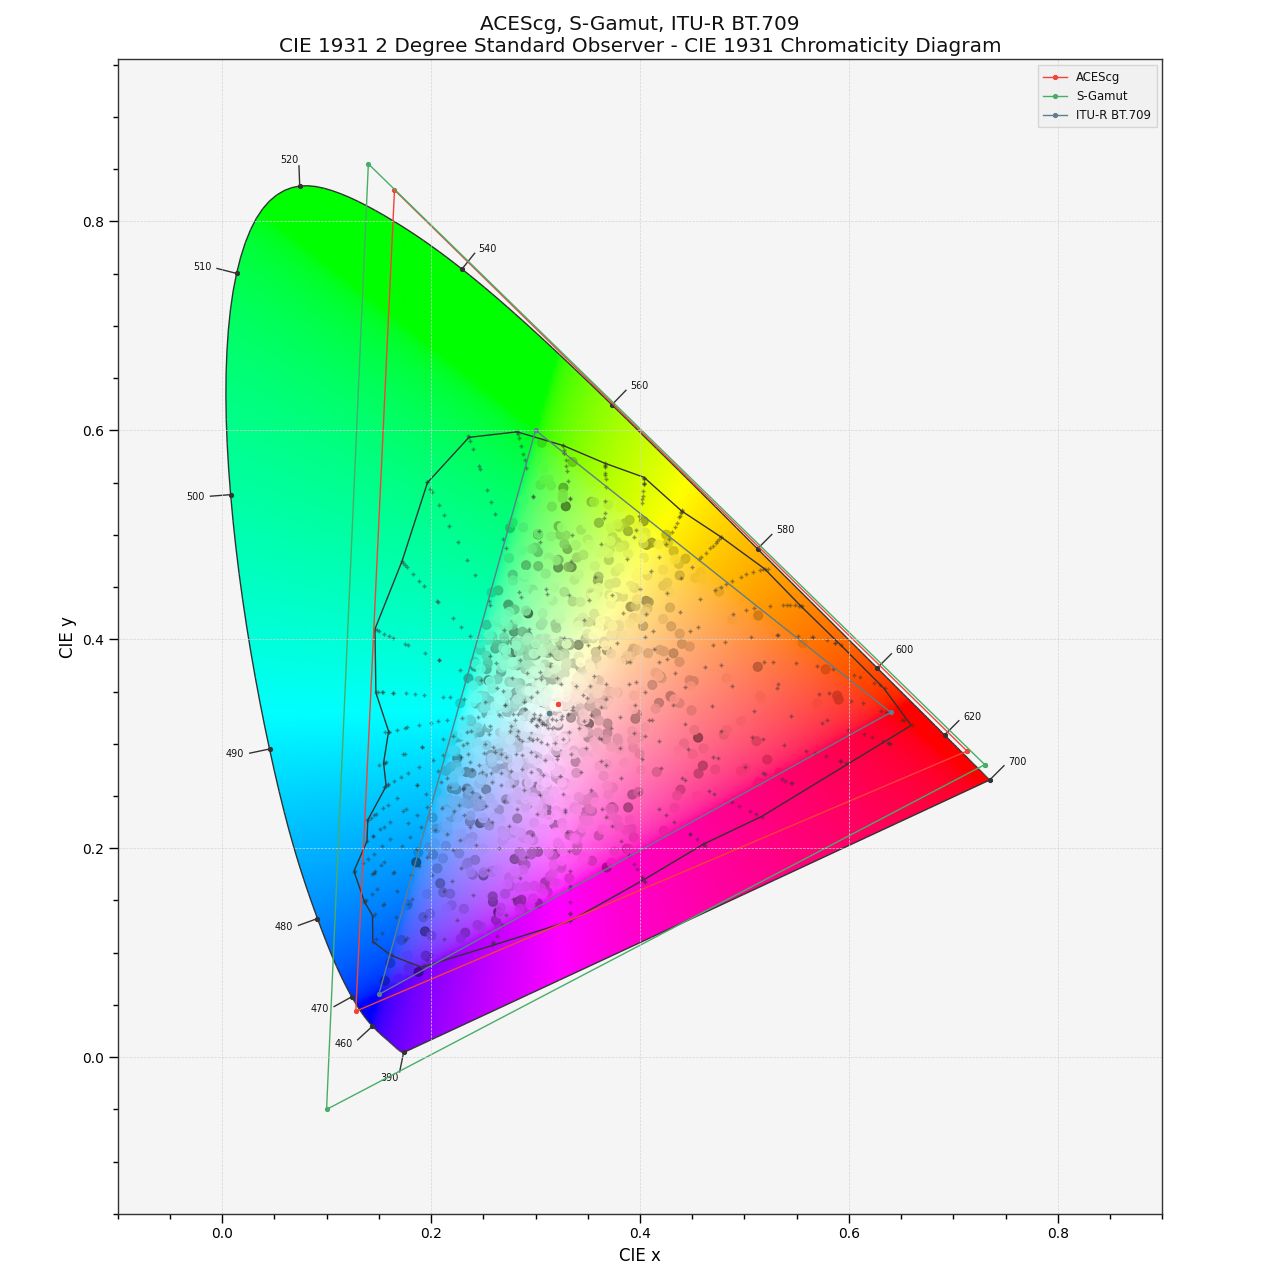 https://colour.readthedocs.io/en/develop/_static/Examples_Plotting_Chromaticities_CIE_1931_Chromaticity_Diagram.png